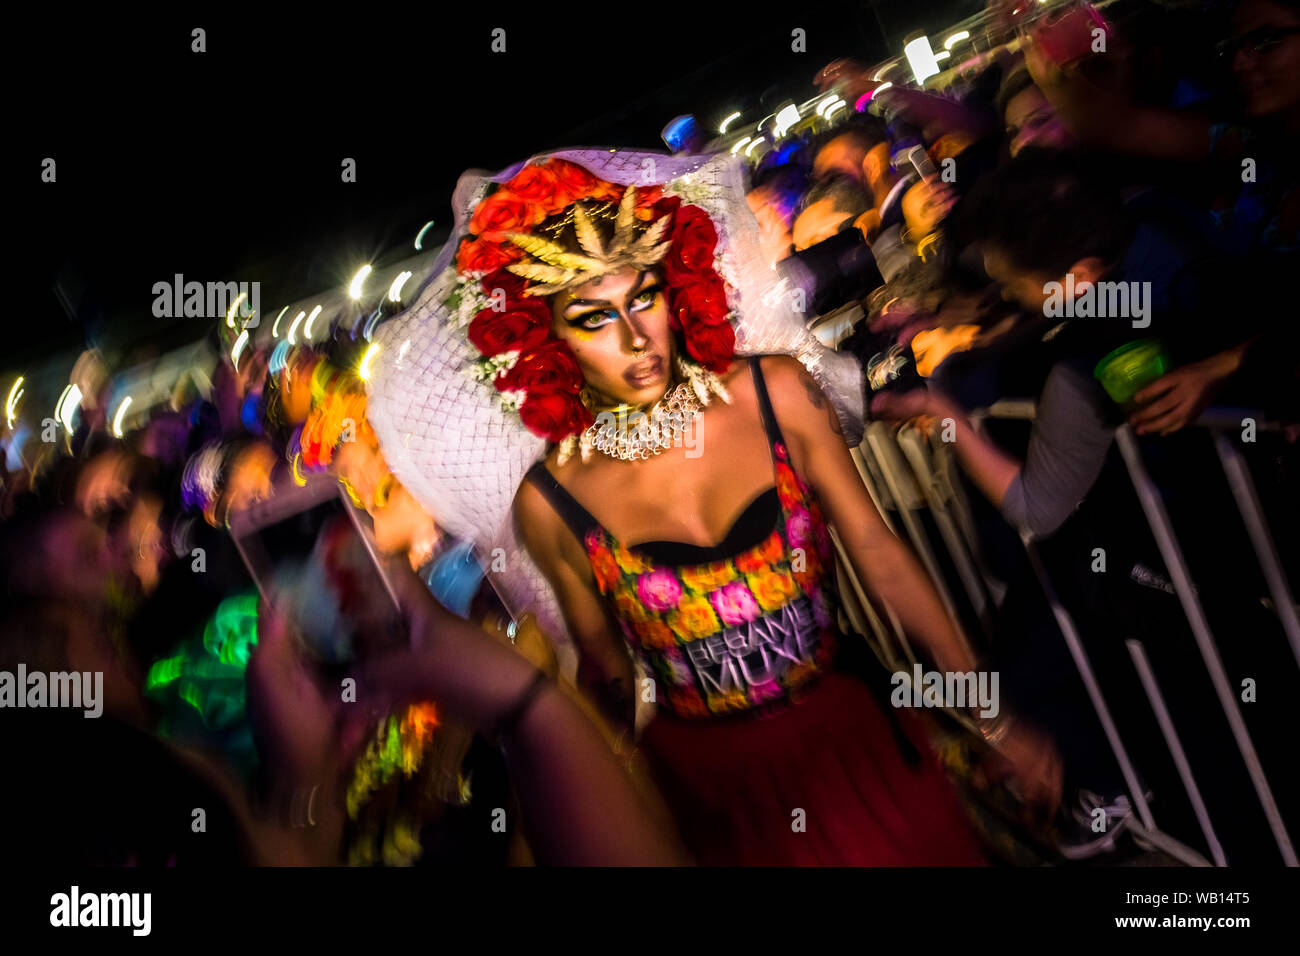 A Mexican “muxe” (typically, a homosexual man wearing female clothes) enters the stage during the festival in Juchitán de Zaragoza, Mexico. Stock Photo